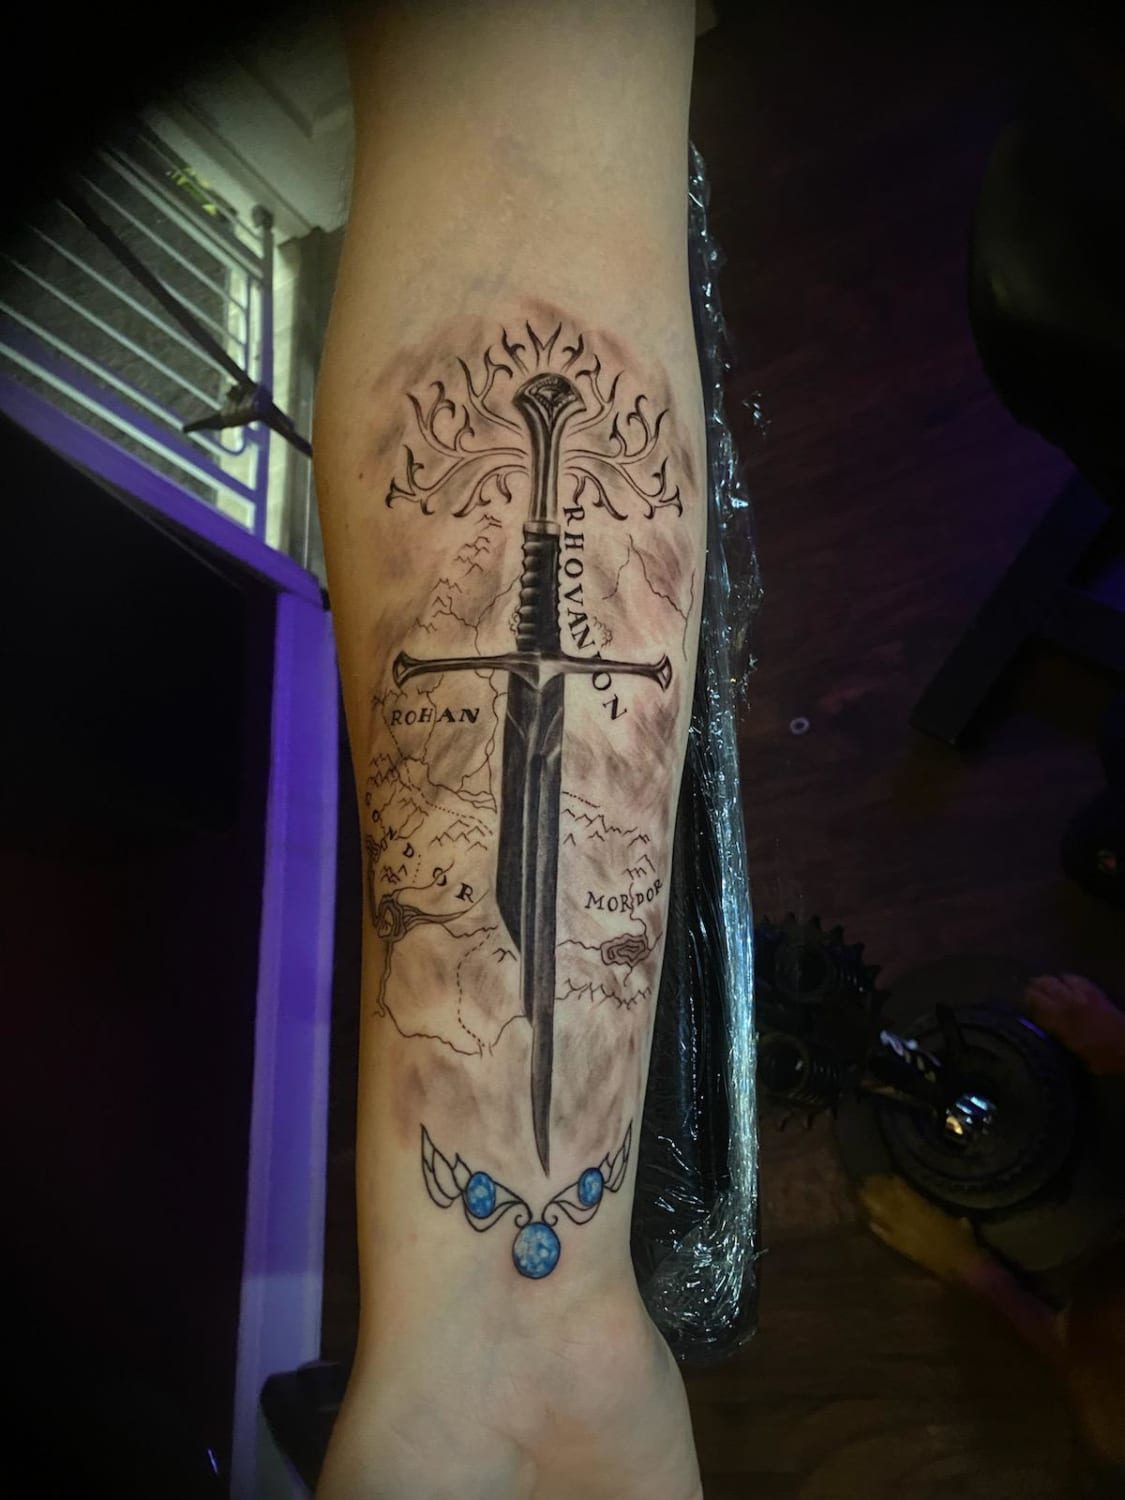 My fresh LOTR/Silmarillion ink! Done by Rachel at Capital City Tattoo in Concord, NH